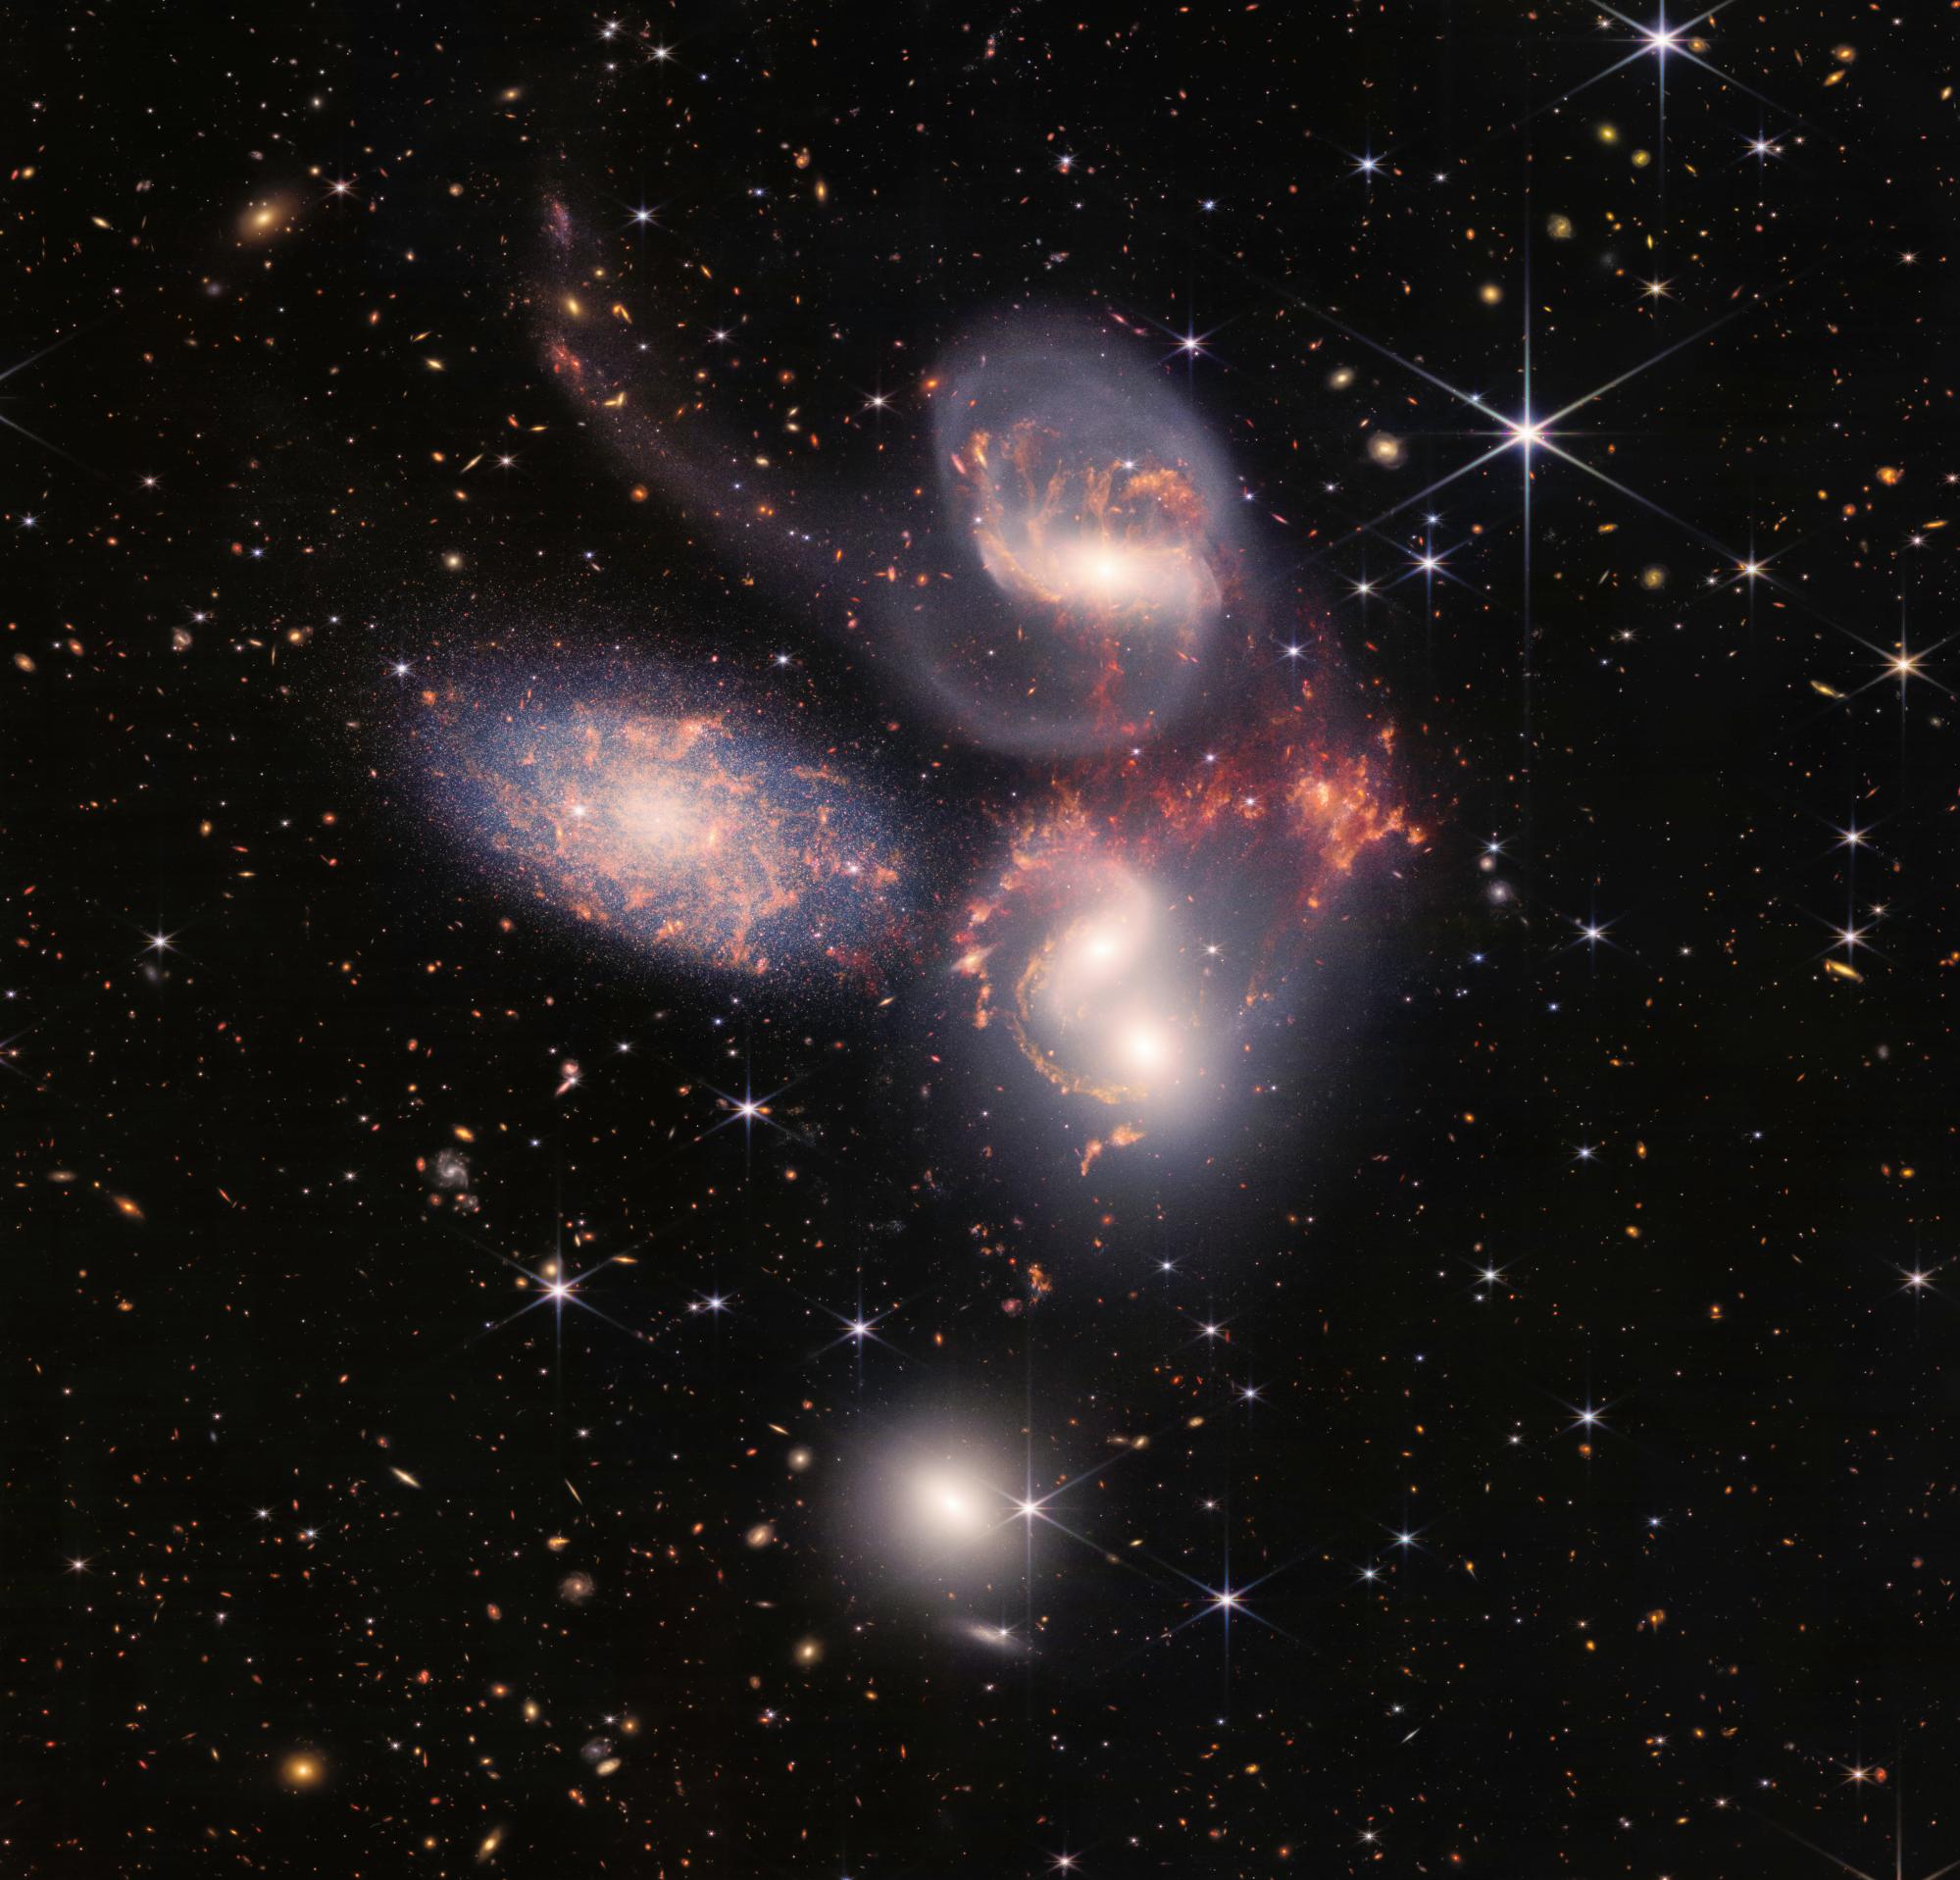 Stephan’s Quintet, a visual grouping of five galaxies.